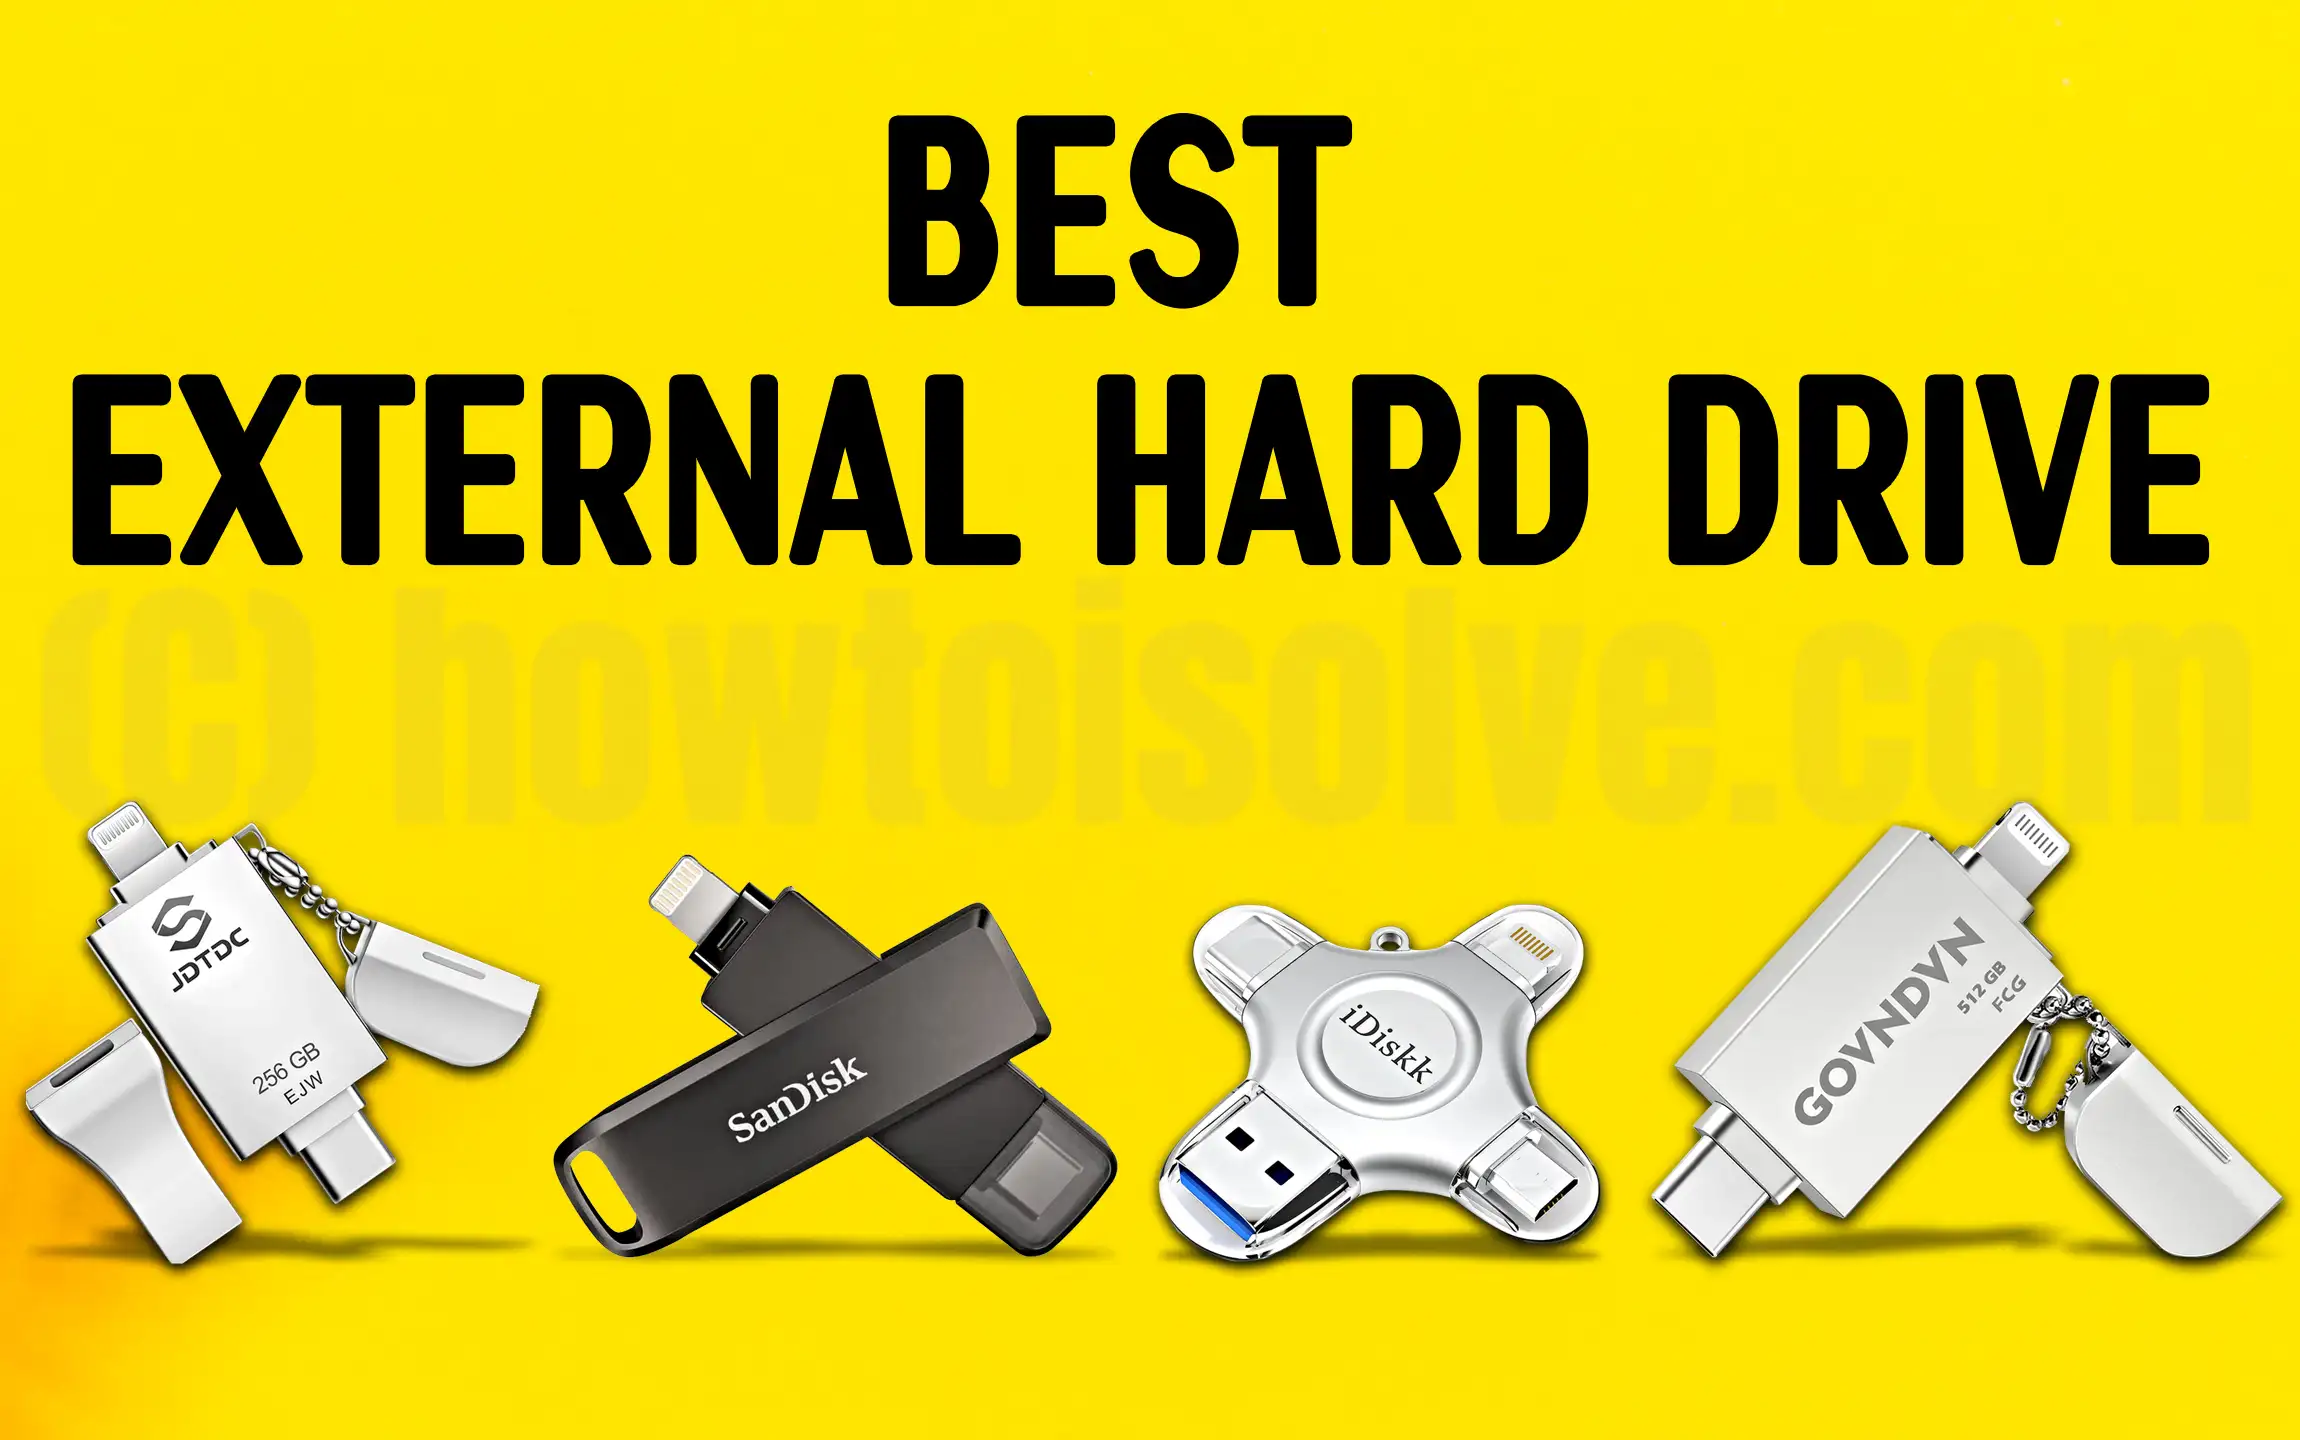 Best External Storage Drives for iPhone